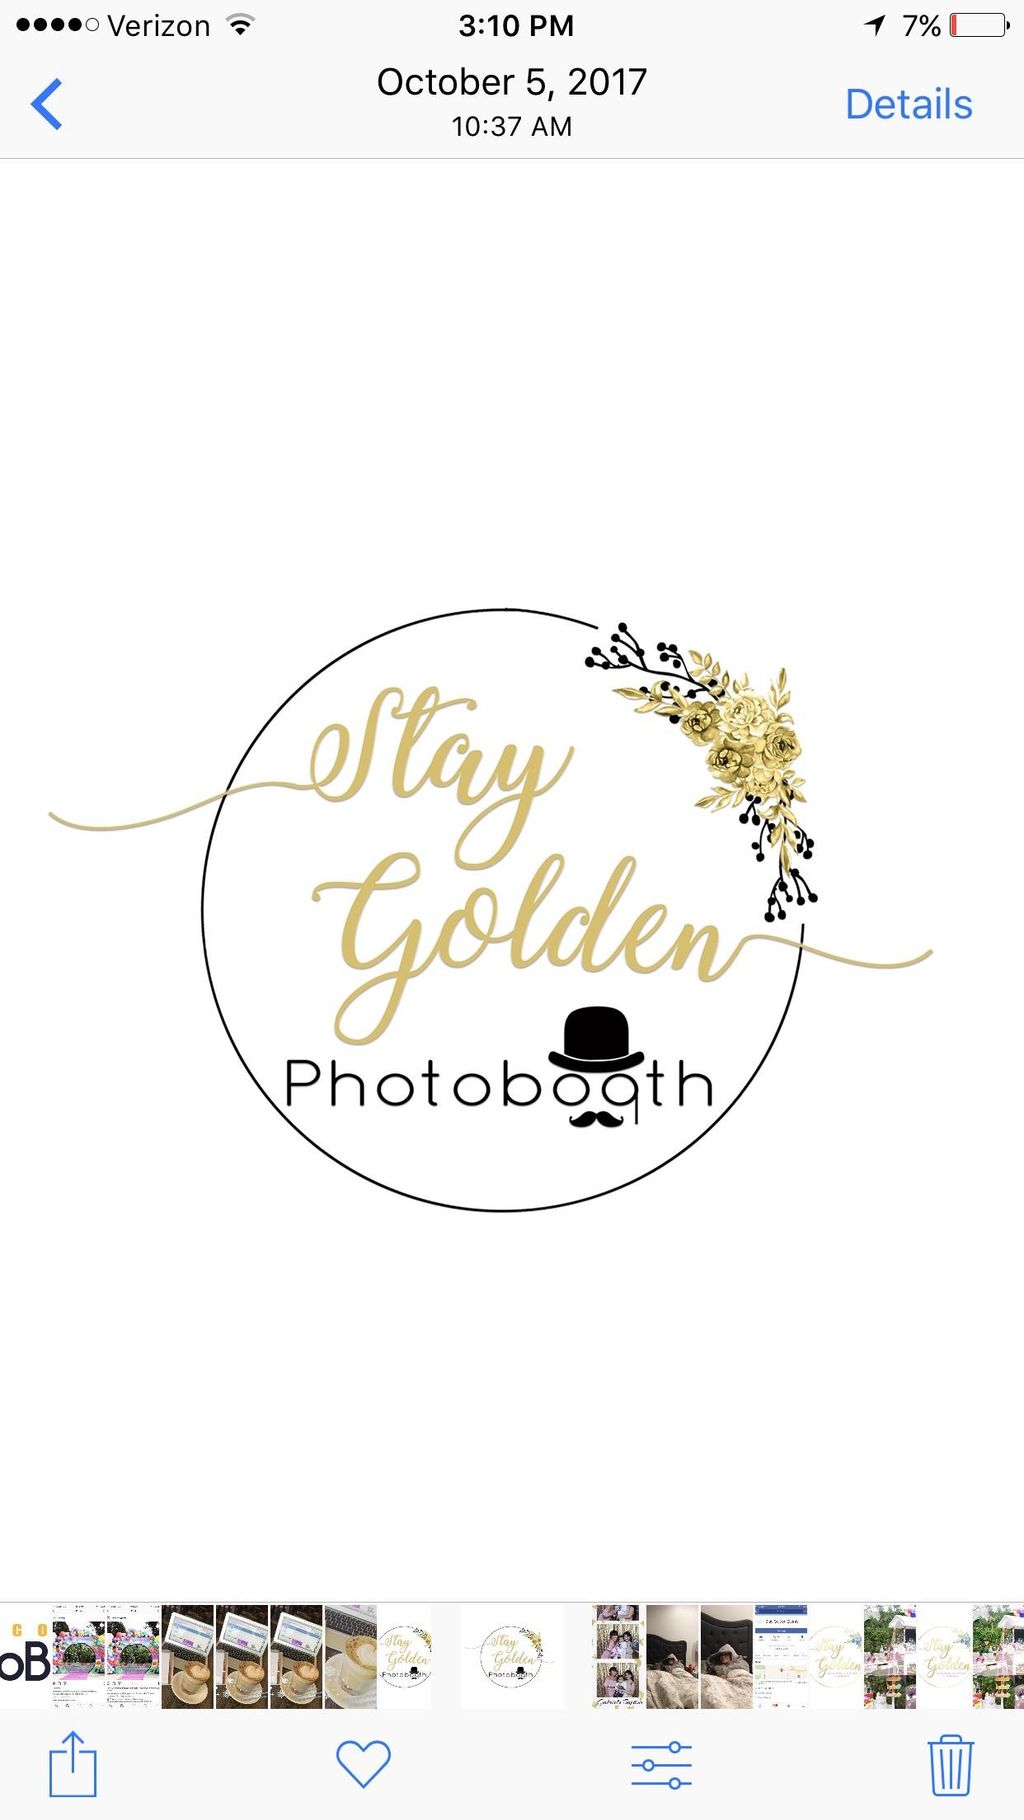 Stay Golden Photobooth